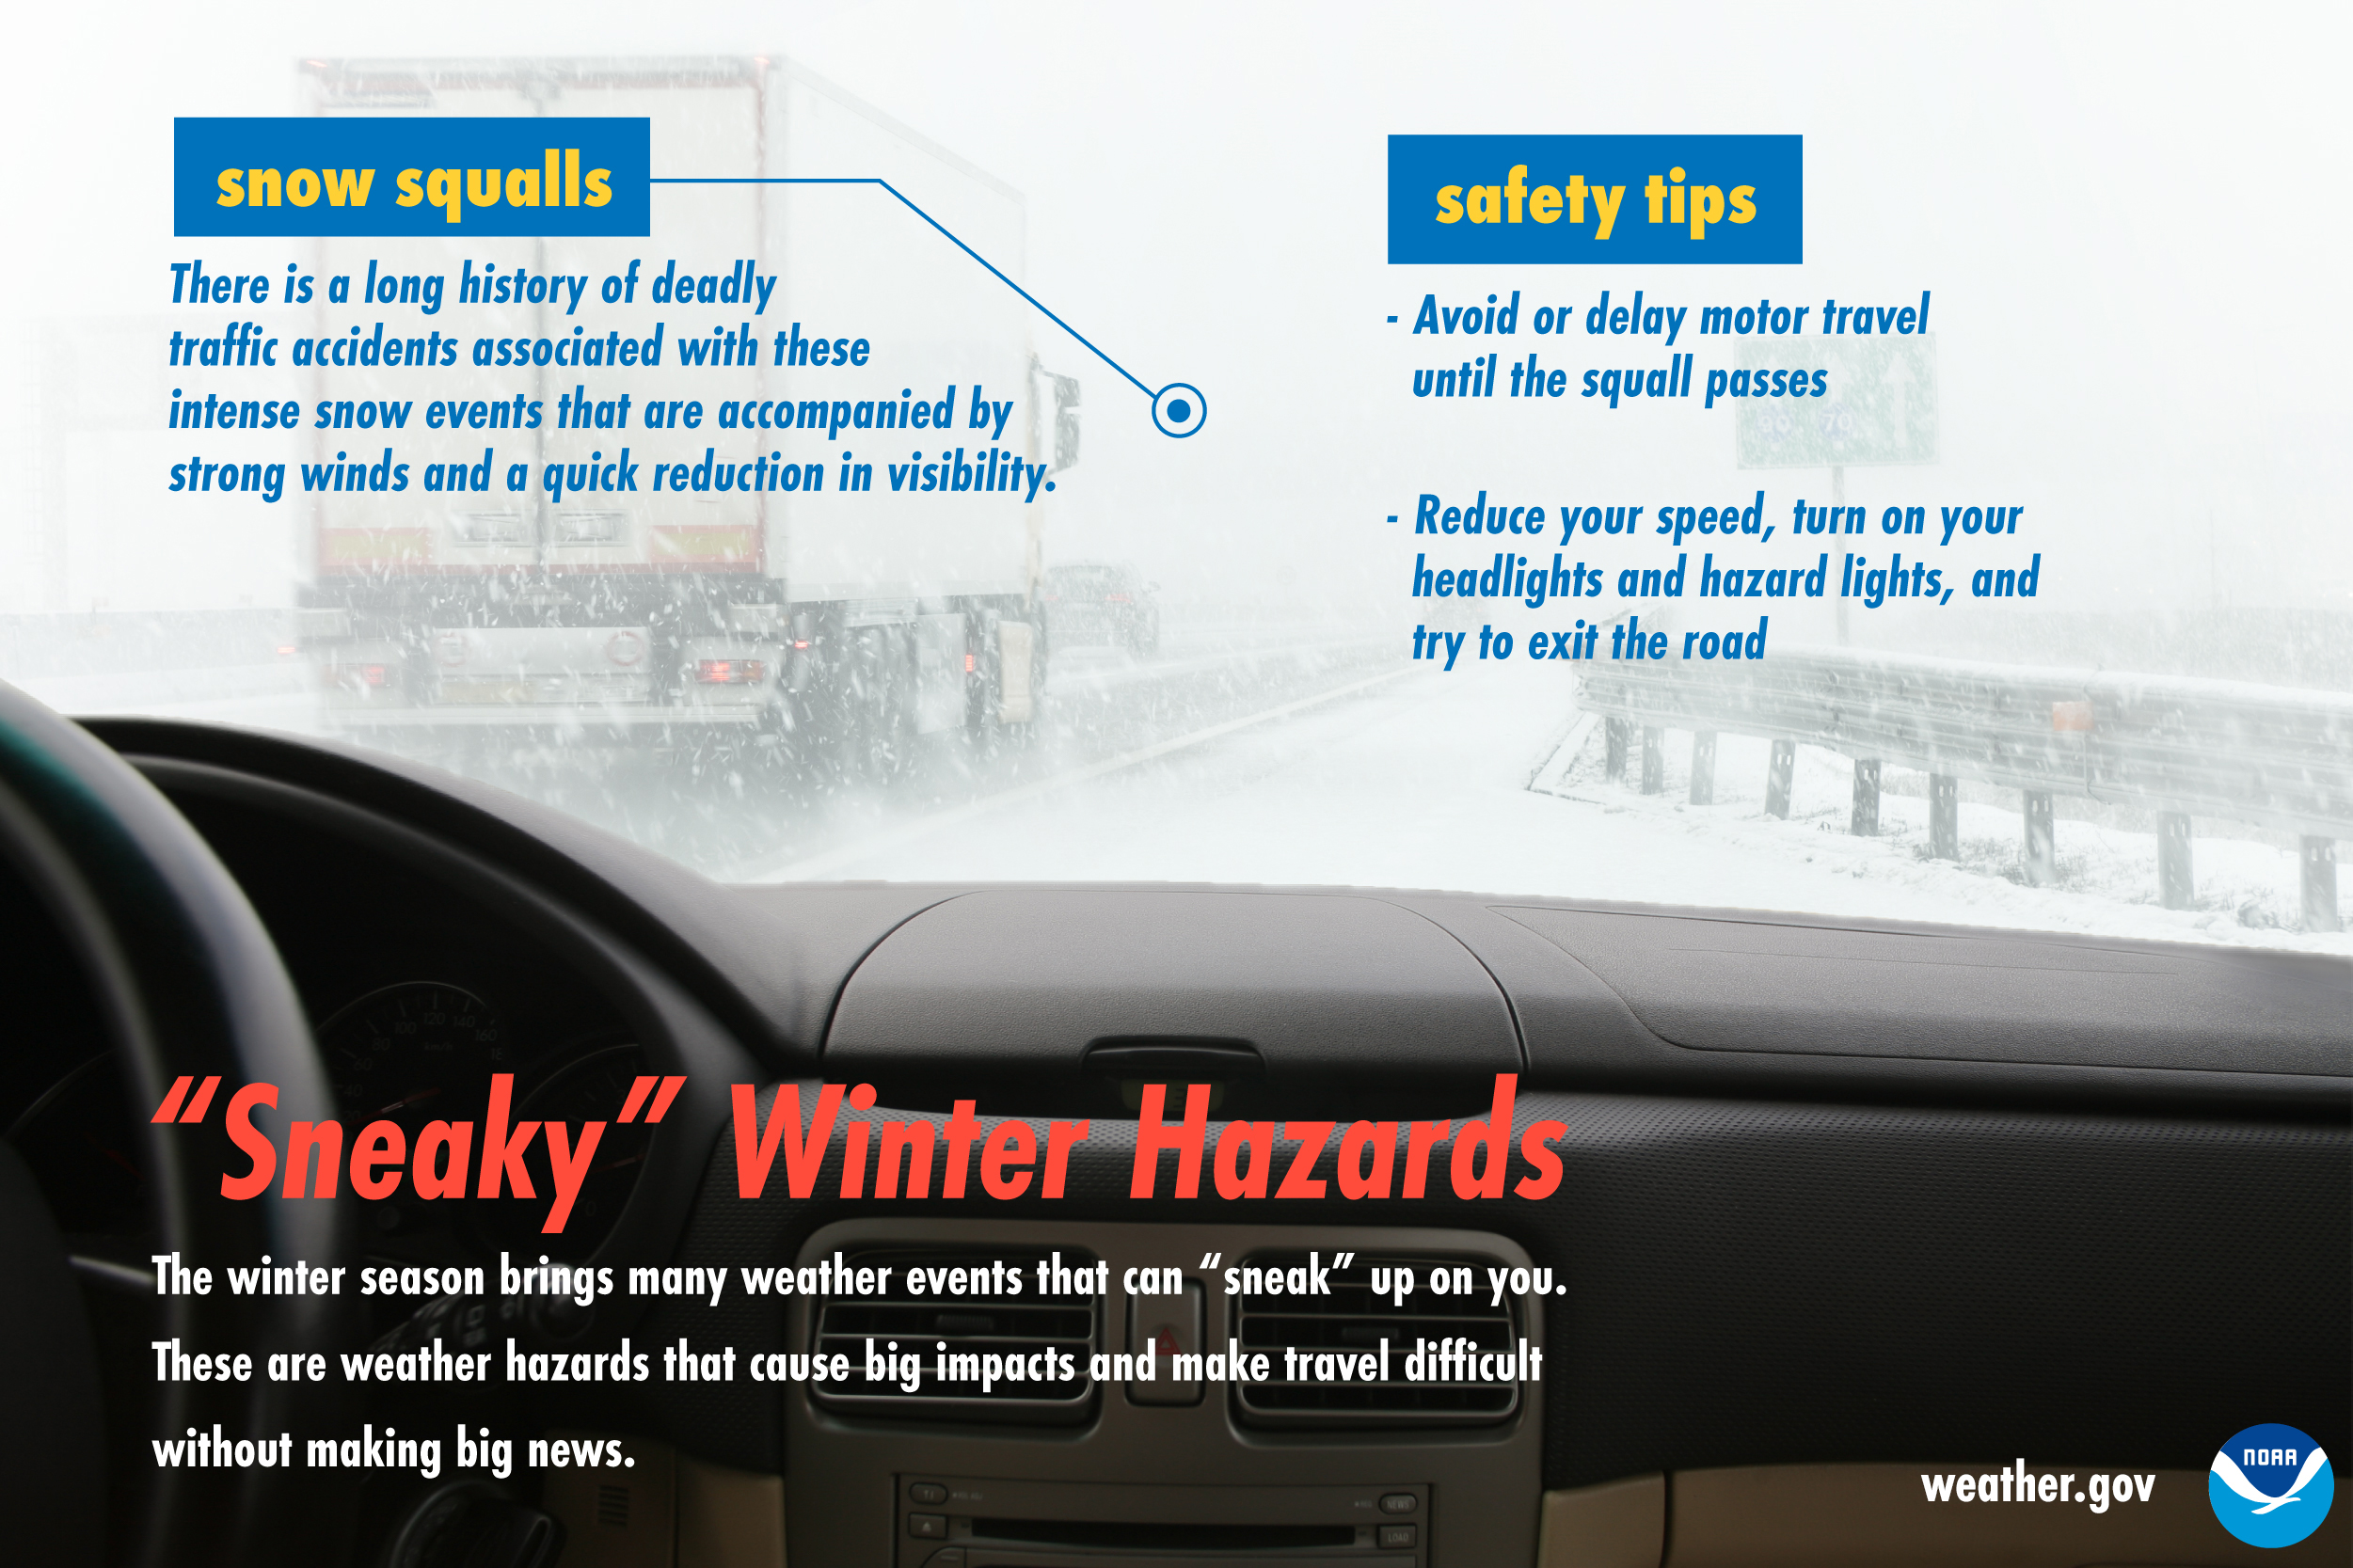 Sneaky Winter Hazards: Snow squalls. There is a long history of deadly traffic accidents associated with these intense snow events that are accompanied by strong winds and a quick reduction in visibility. Safety tips: avoid or delay motor travel until the squall passes; reduce your speed, turn on your headlights and hazard lights, and try to exit the road.